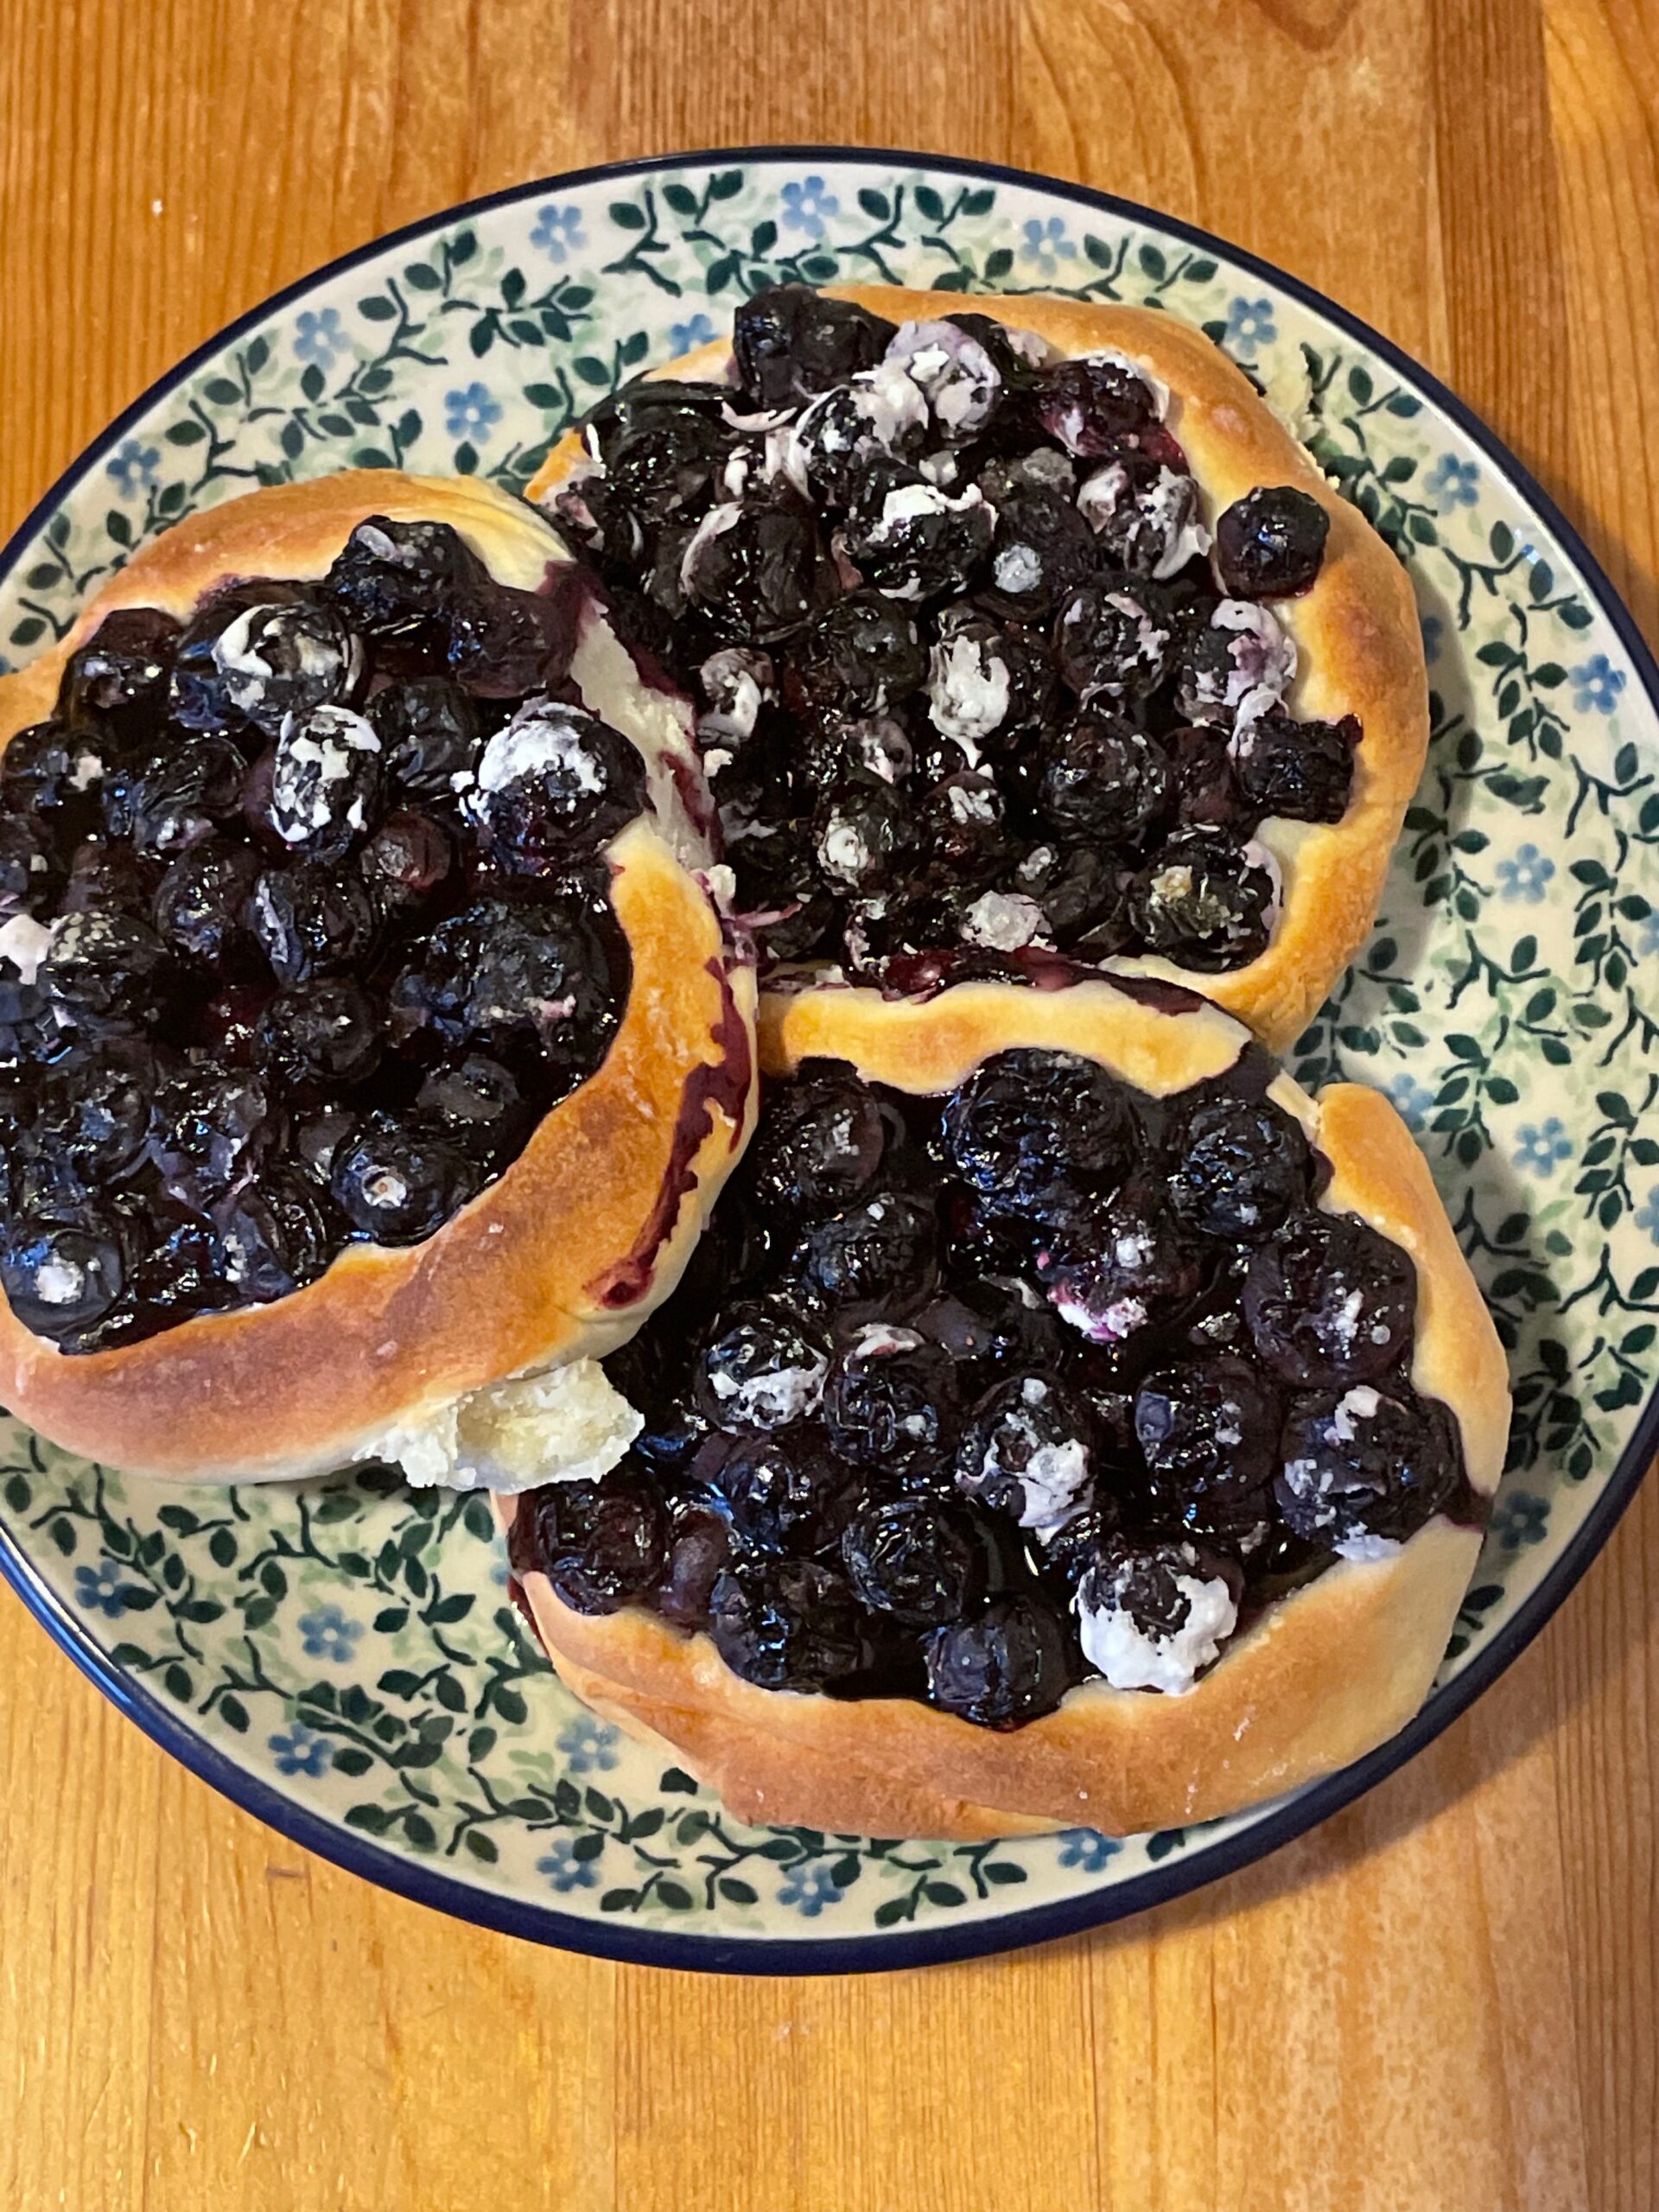 Quick and simple Polish-style blueberry buns recipe